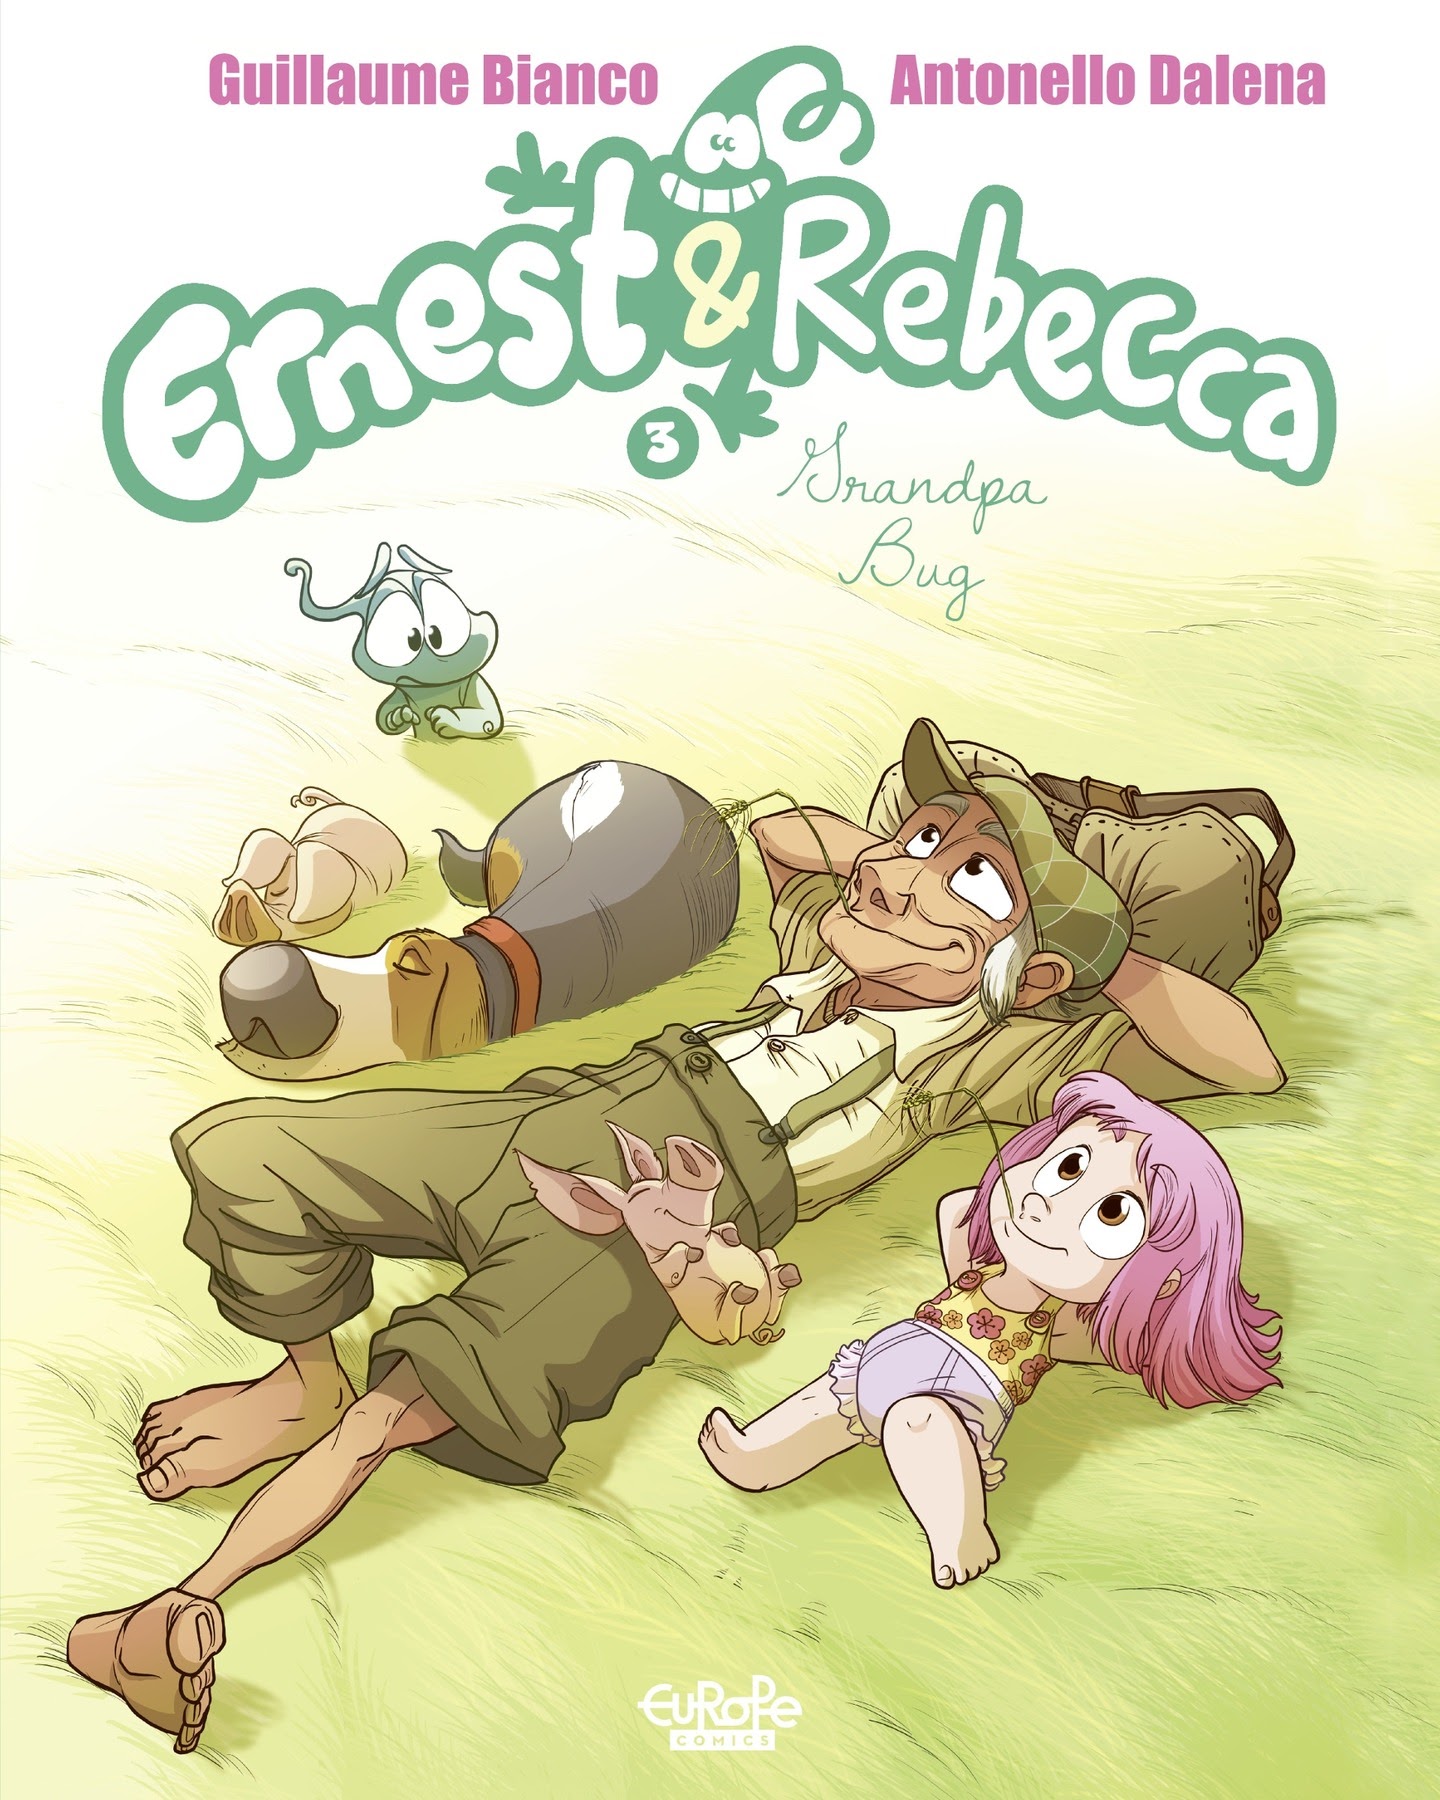 Read online Ernest & Rebecca comic -  Issue #3 - 1